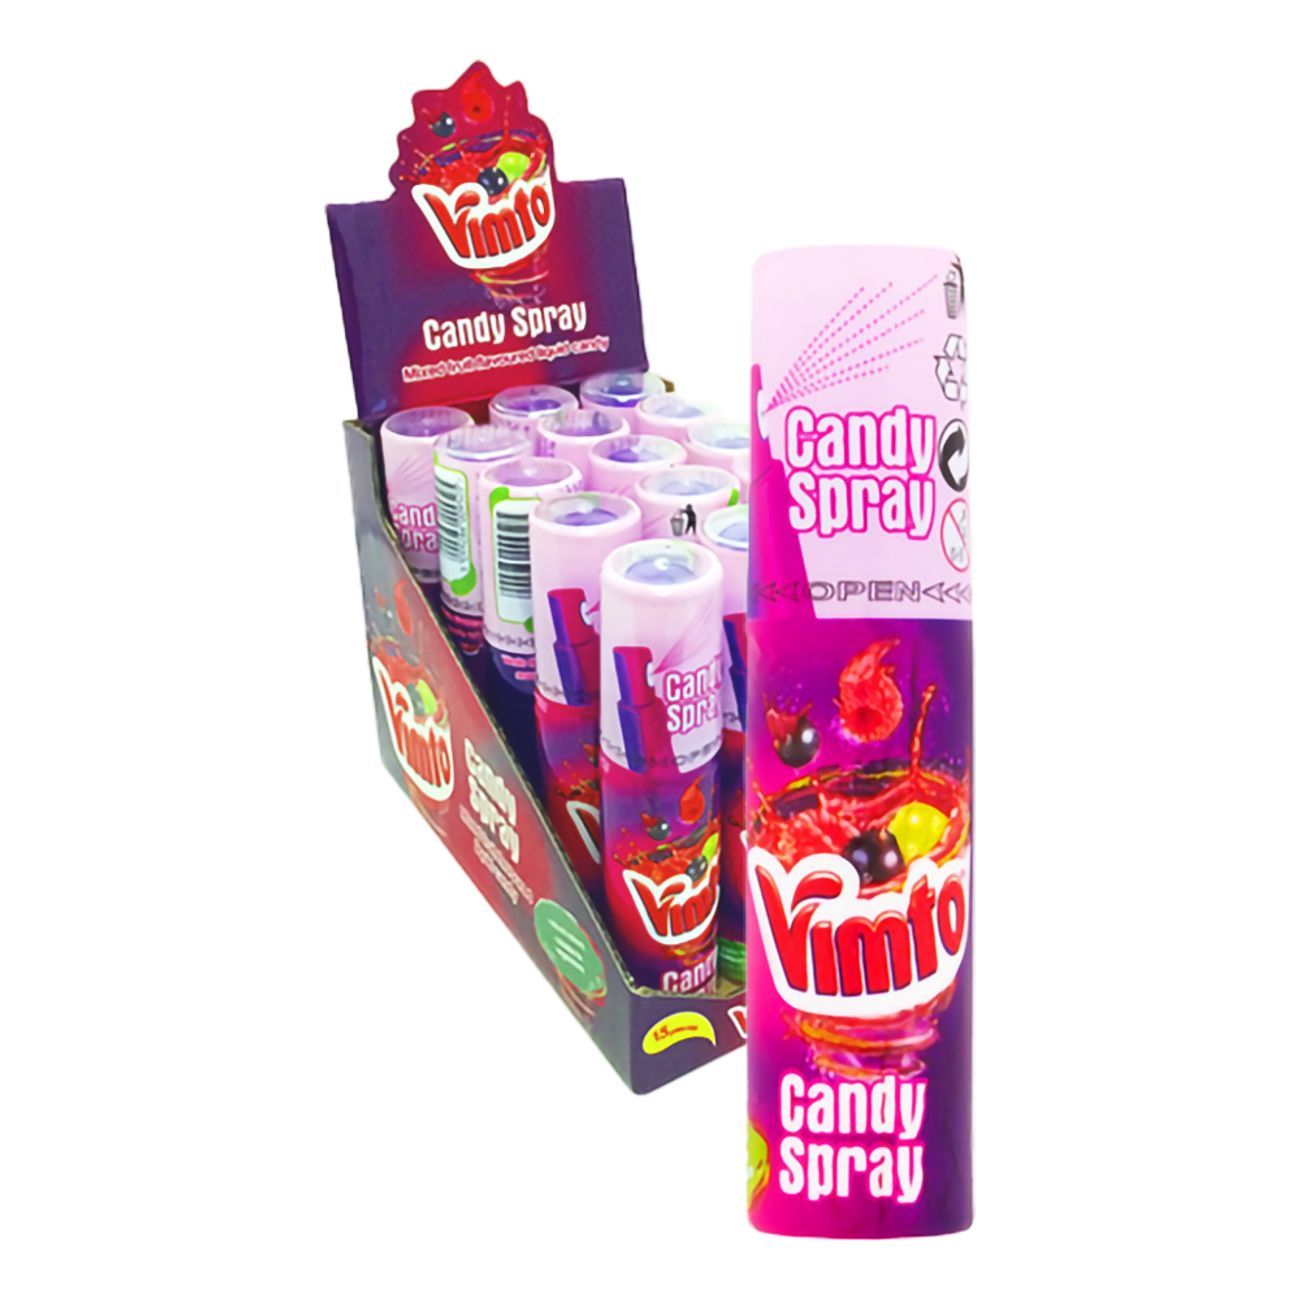 vimto-candy-spray-storpack-95413-2